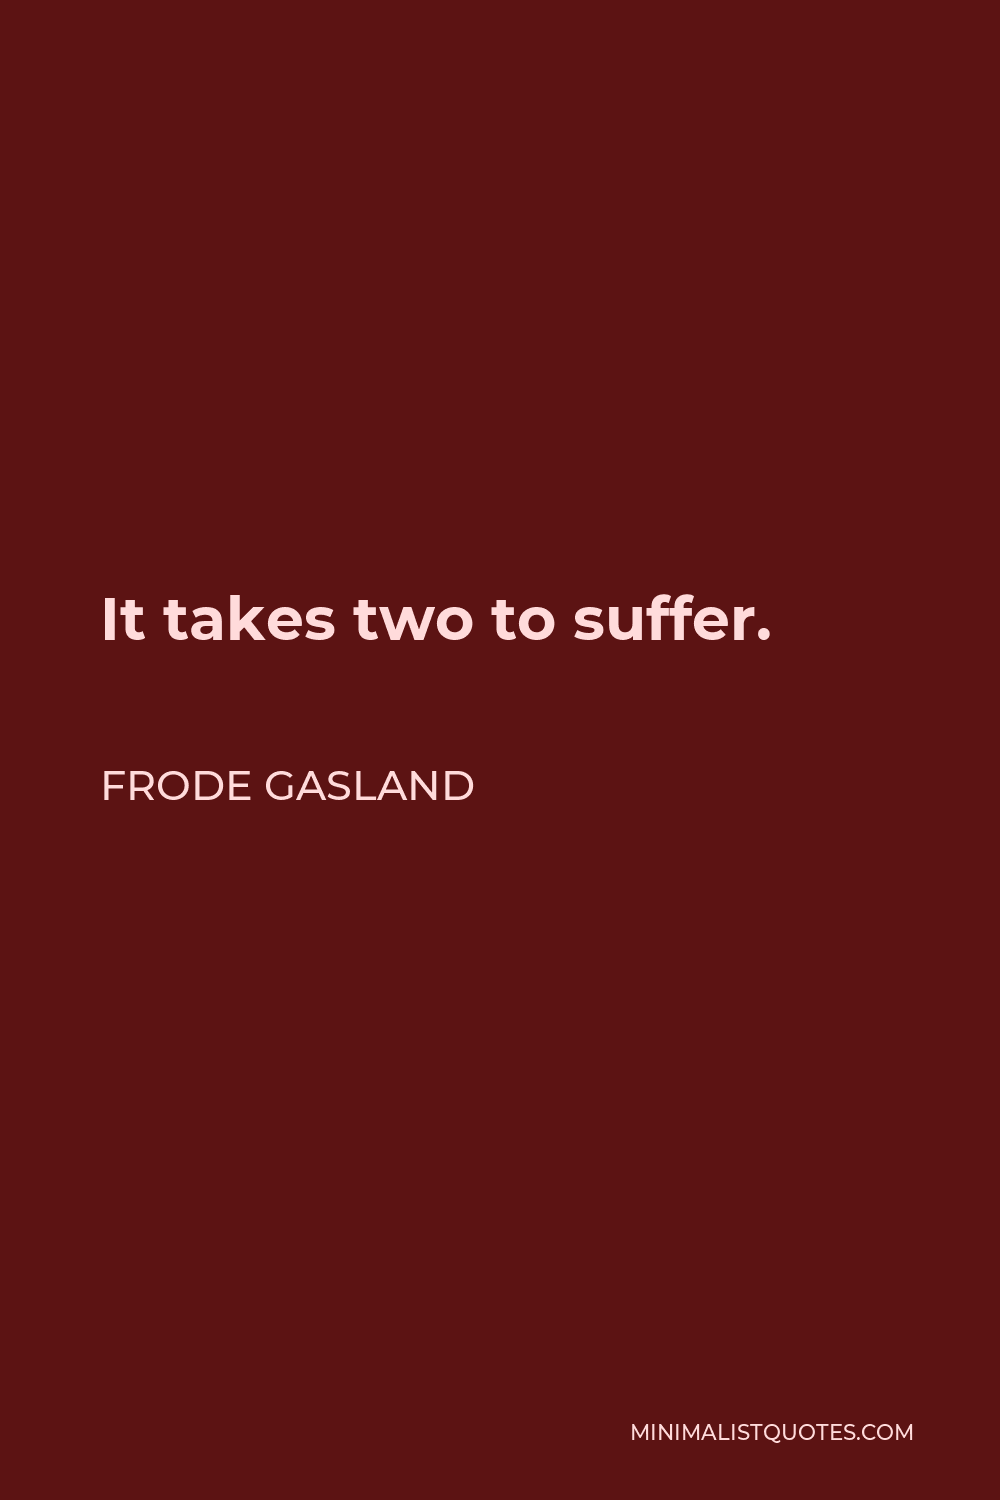 Frode Gasland Quote - It takes two to suffer.